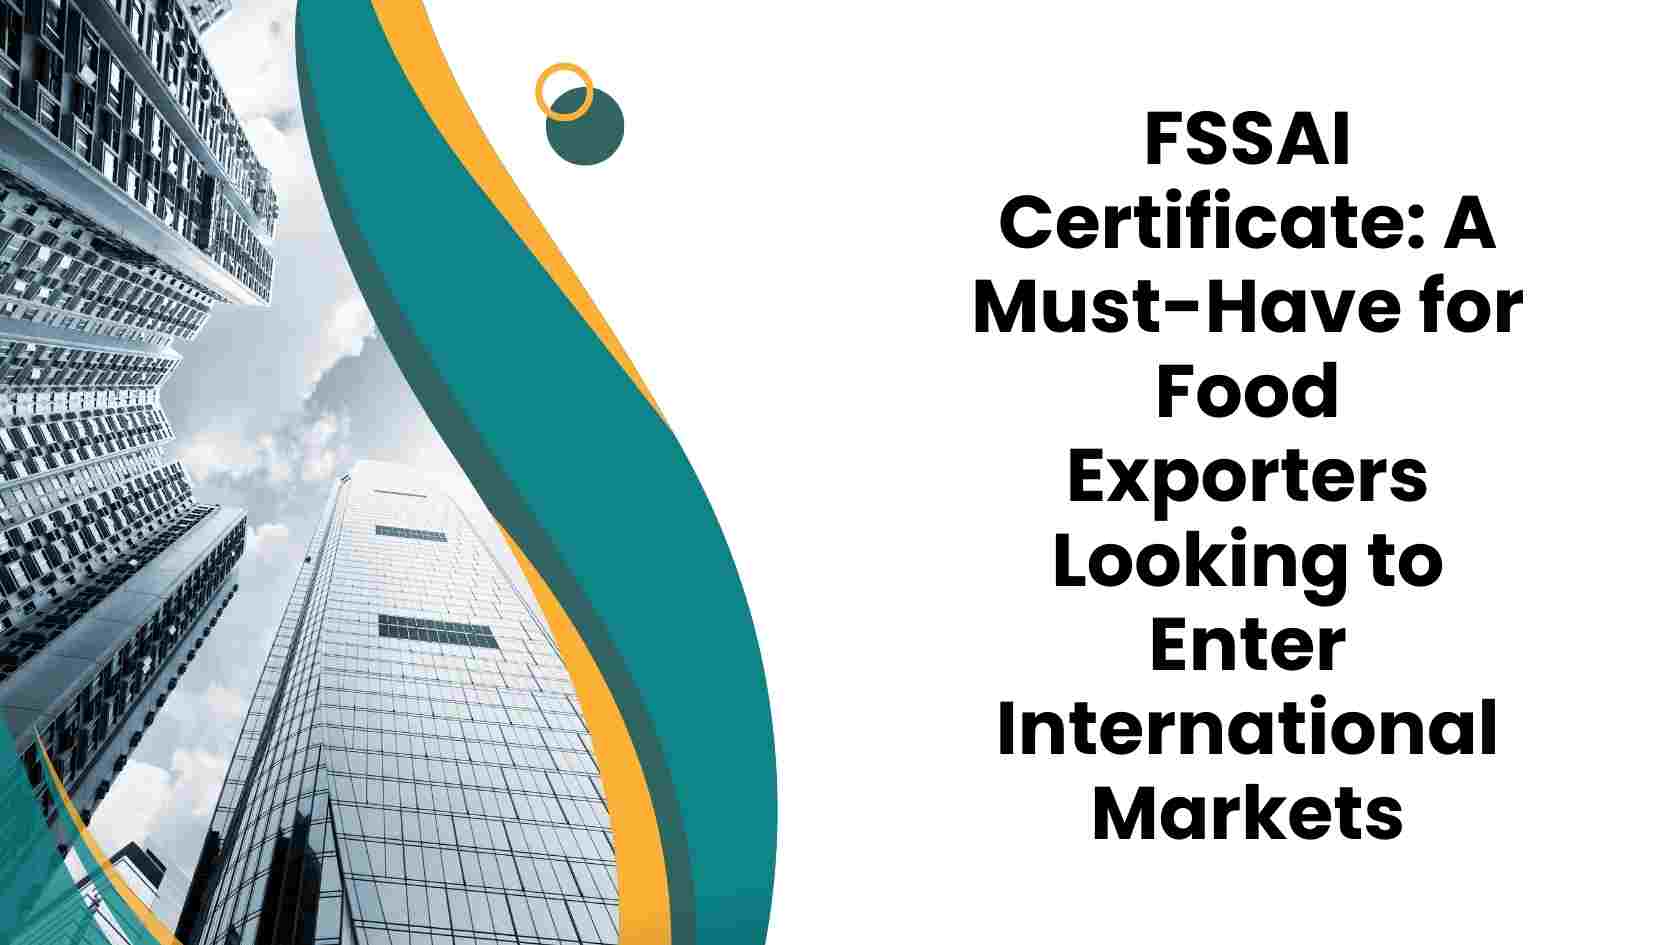 FSSAI Certificate A Must-Have for Food Exporters Looking to Enter International Markets